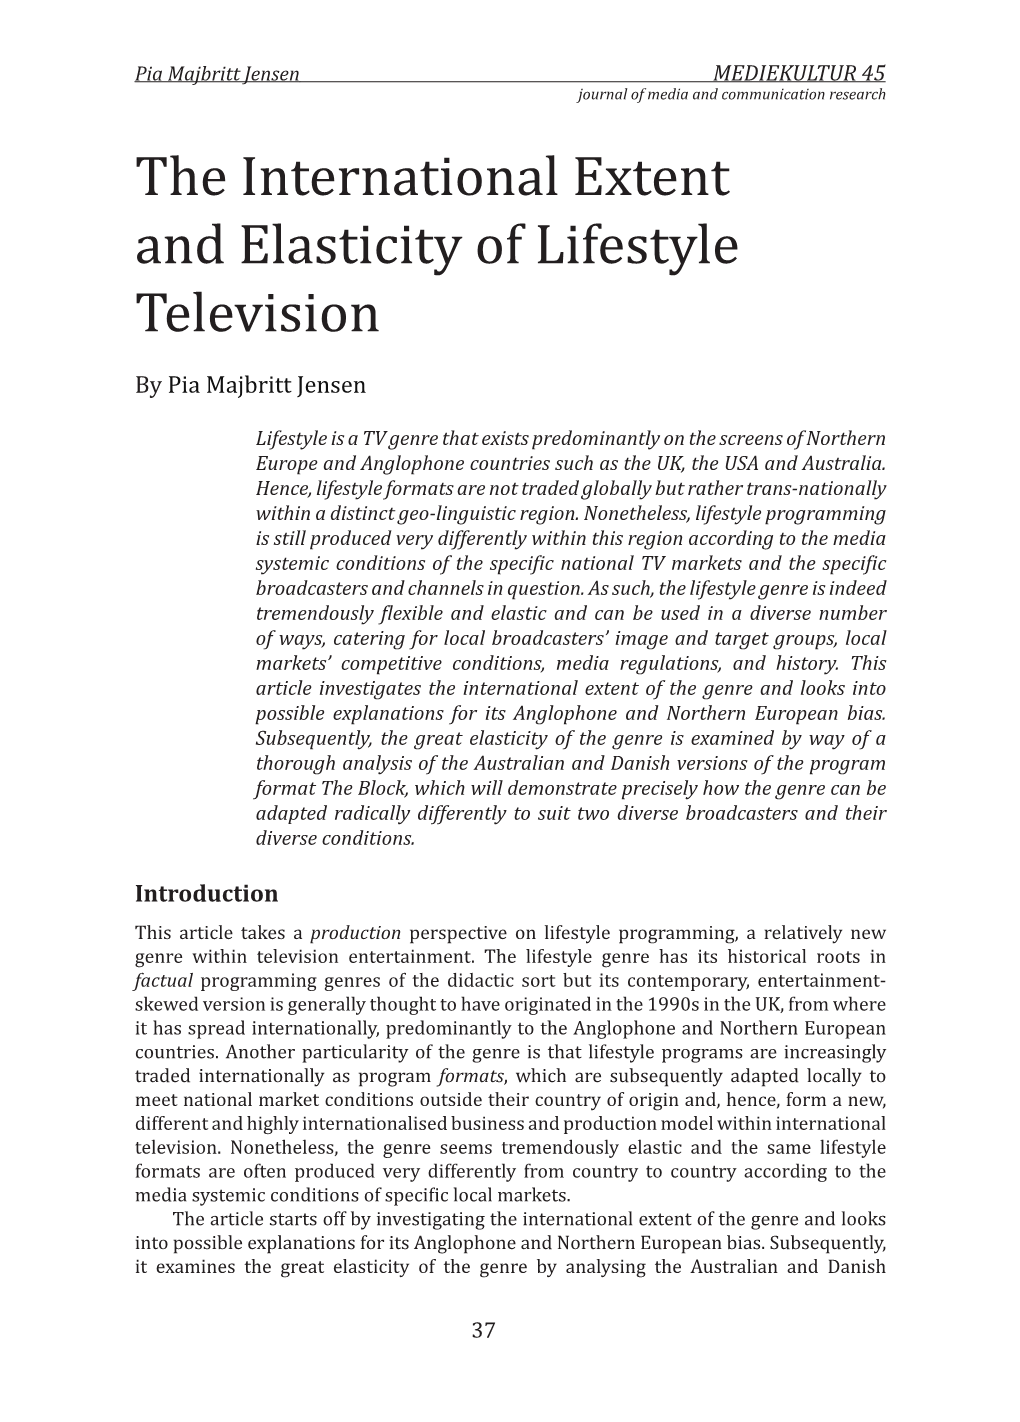 The International Extent and Elasticity of Lifestyle Television